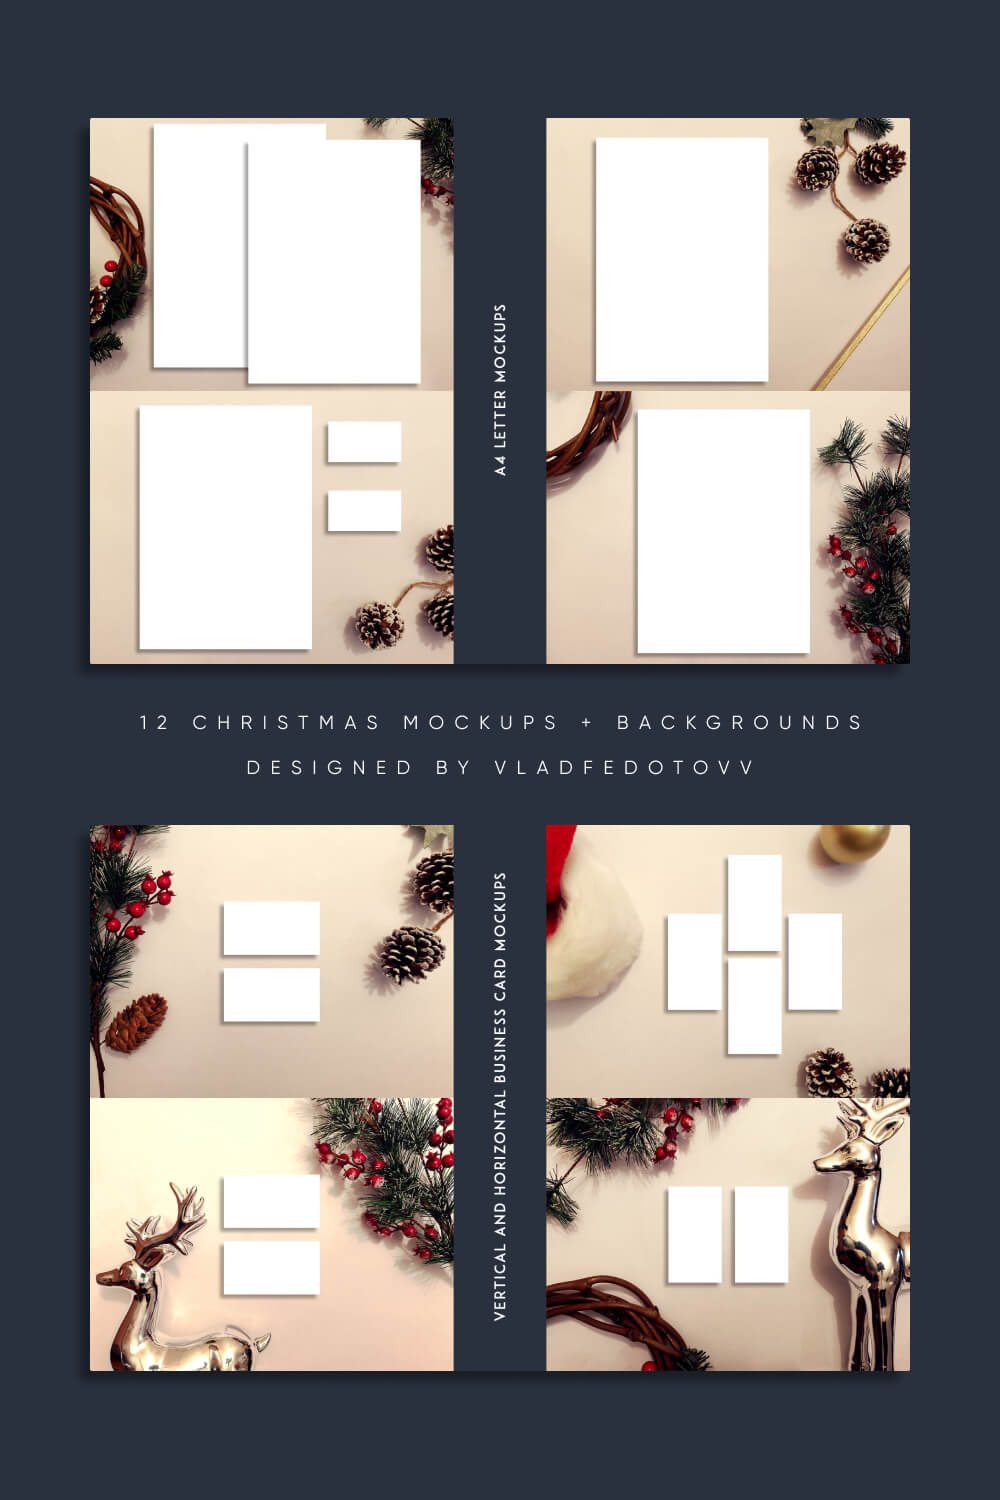 We are happy to introduce you Christmas Mockups and backgrounds